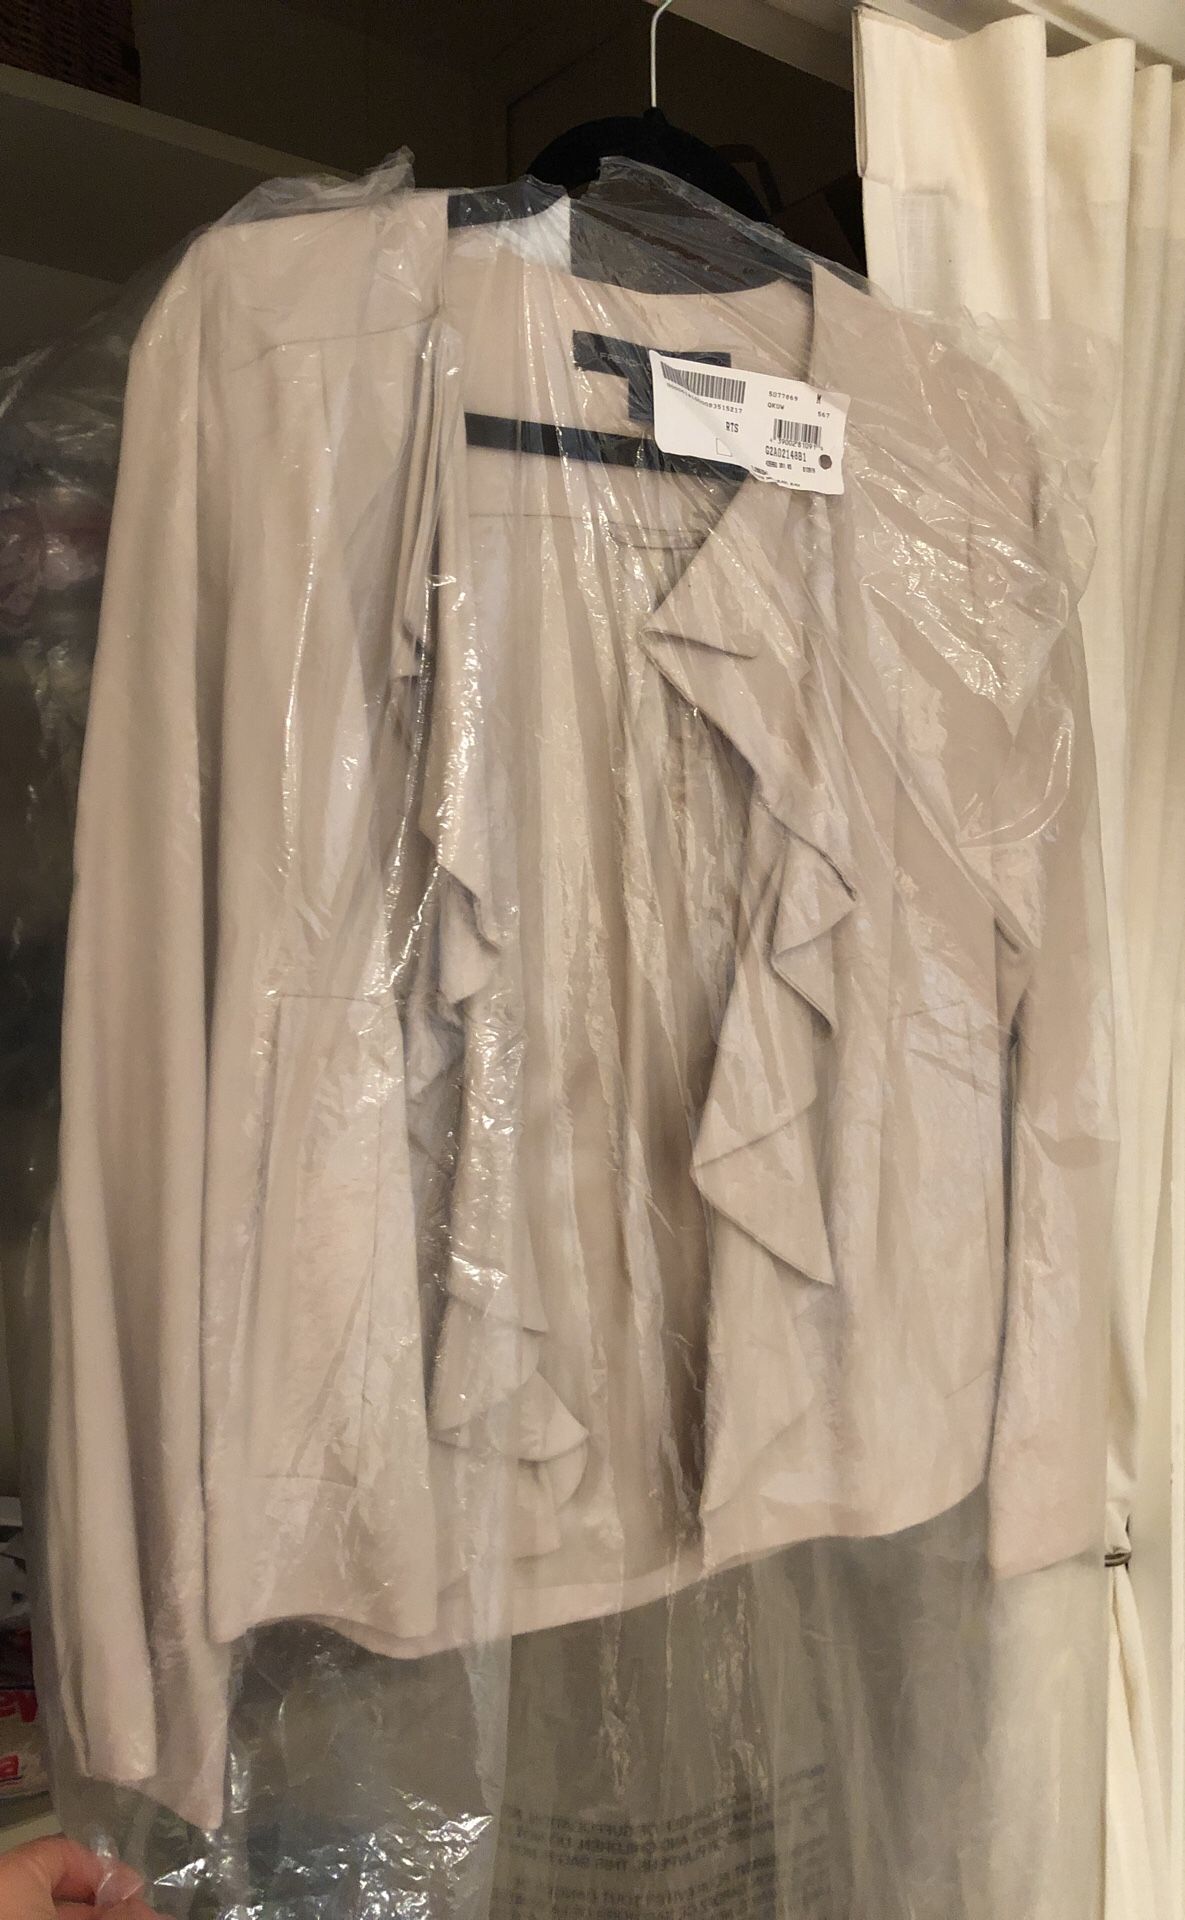 French connection blazer jacket off white / nude color size 0